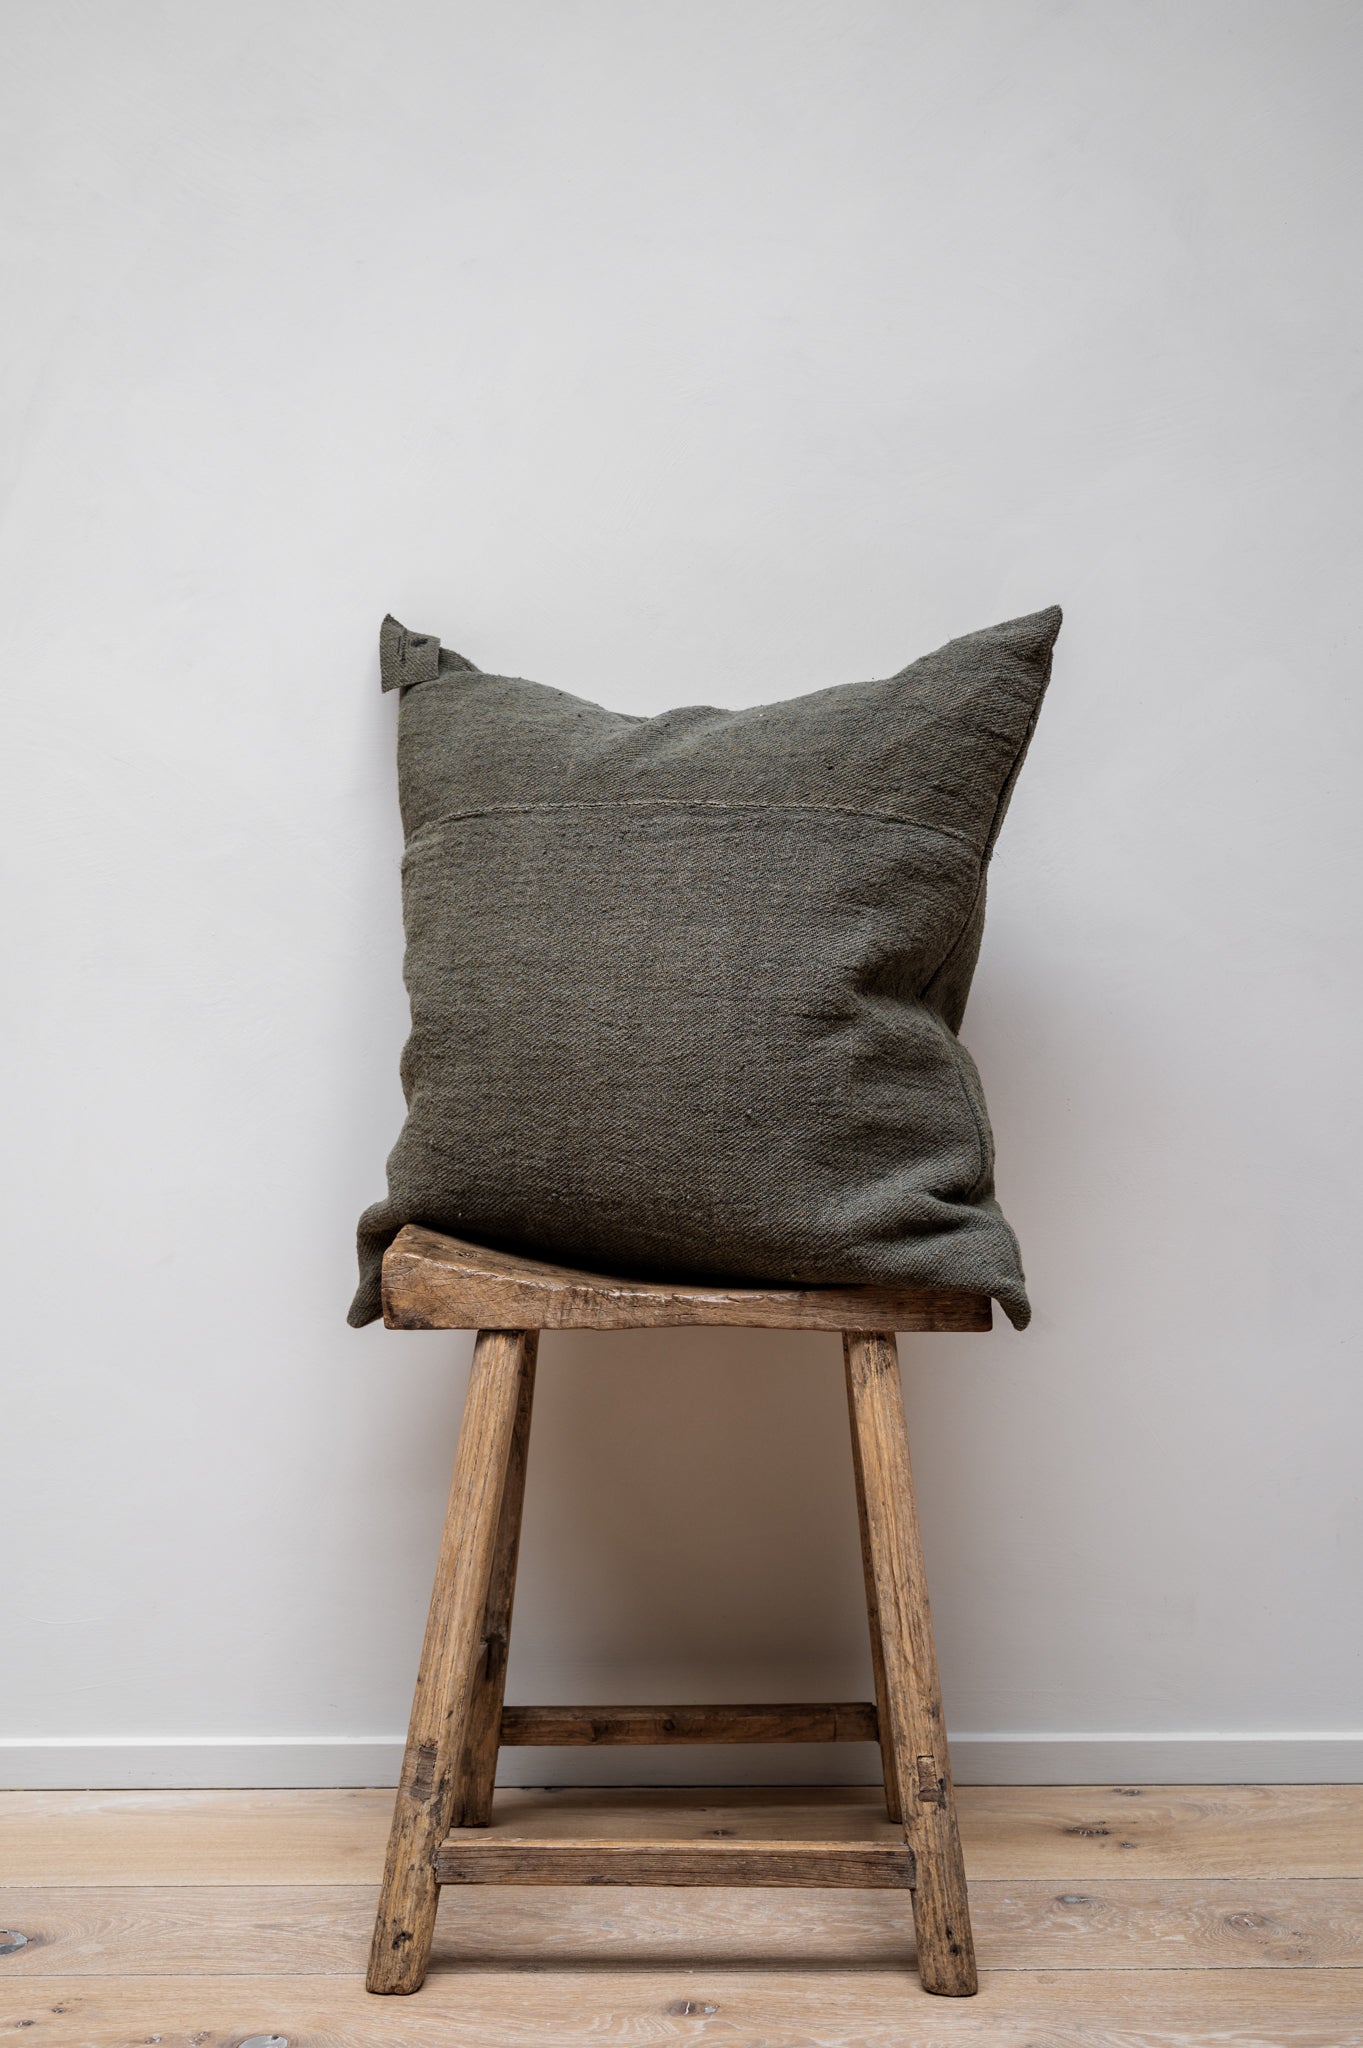 Chanvre Vintage - Olive Green Cushion by Isabelle Yamamoto set on a wooden stool.